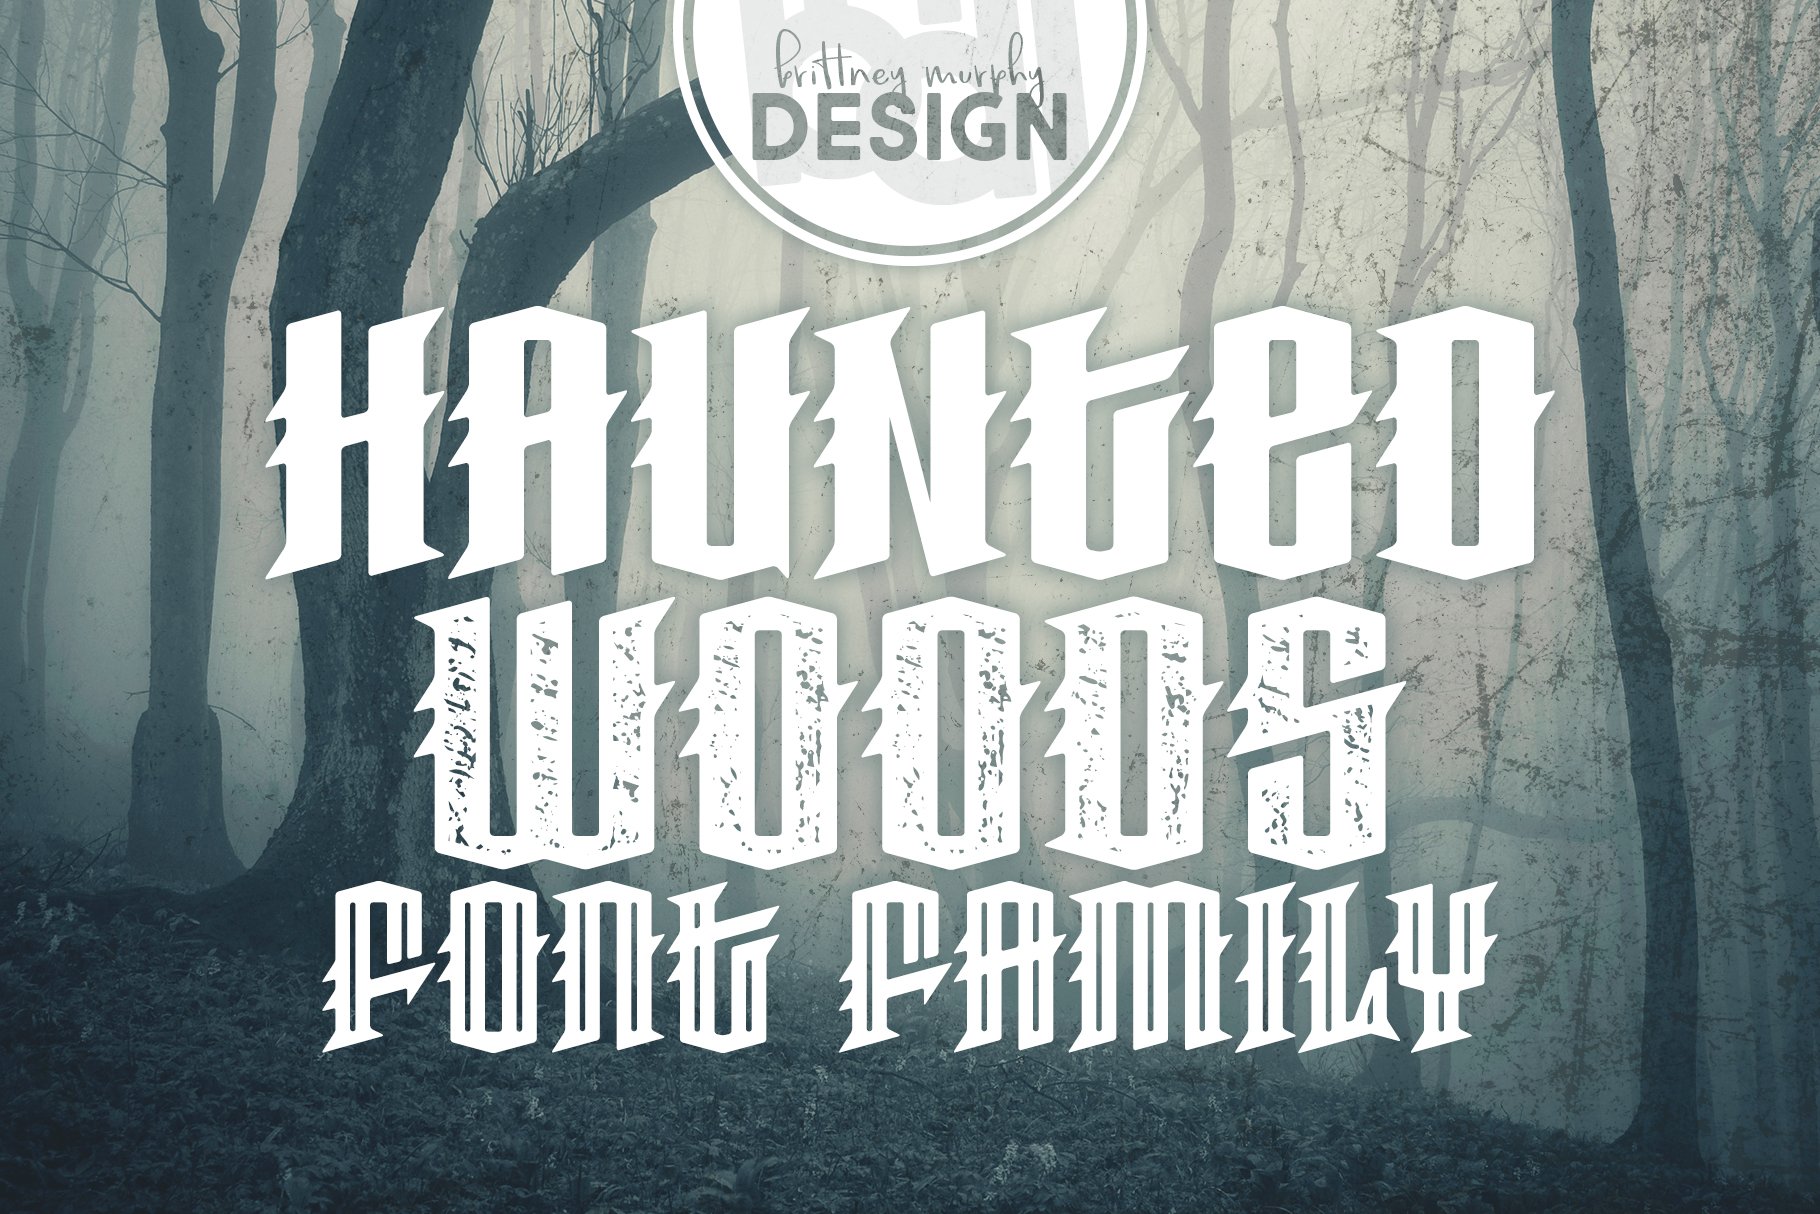 Haunted Woods cover image.